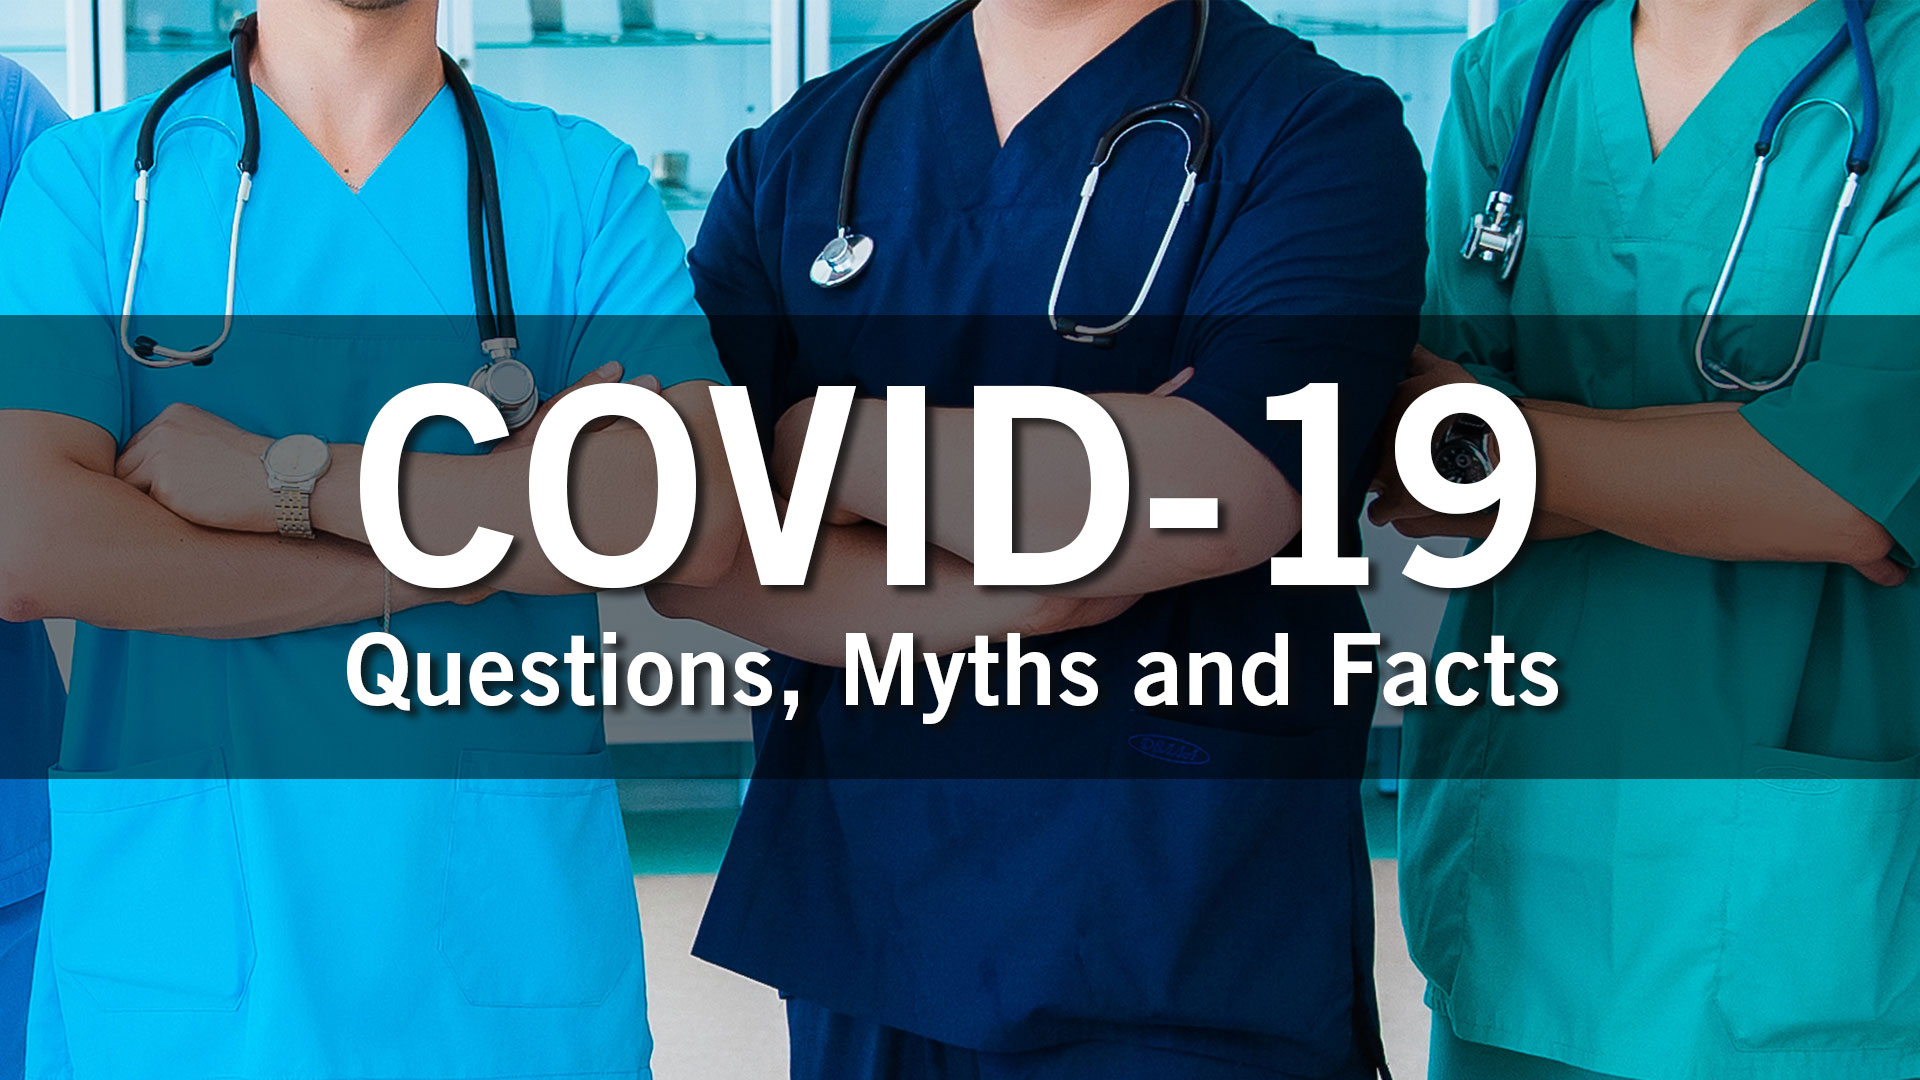 COVID-19 Questions, Myths and Facts